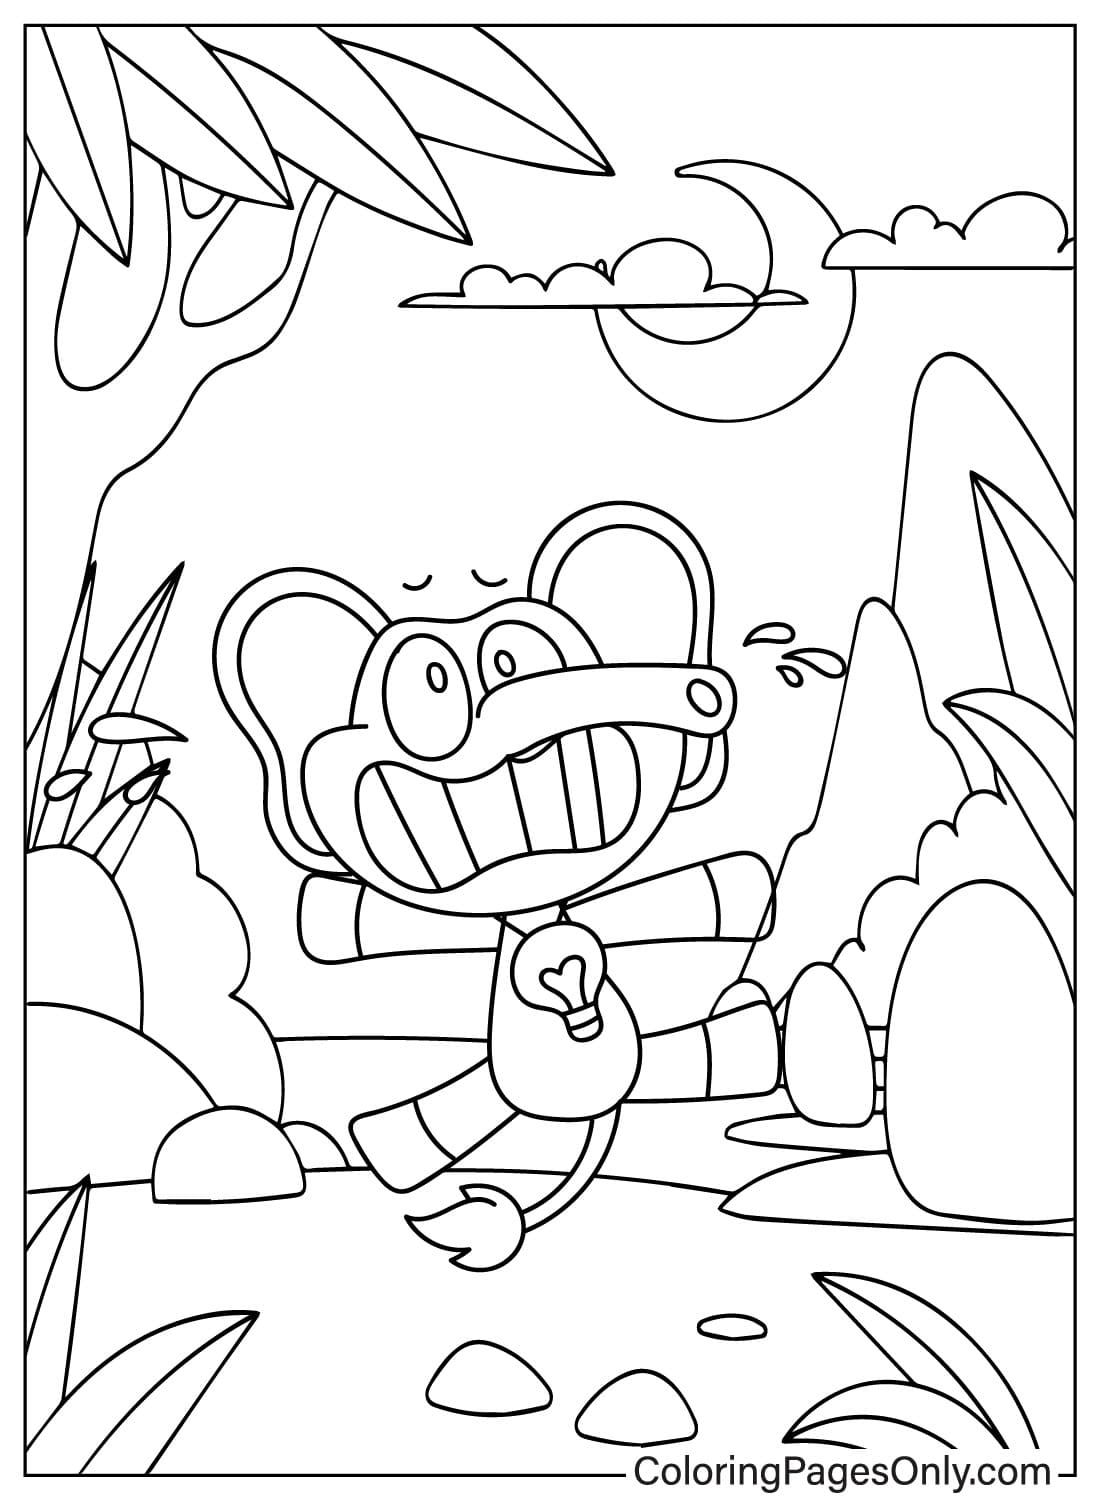 Bubba Bubbaphant Scared Coloring Page from Bubba Bubbaphant